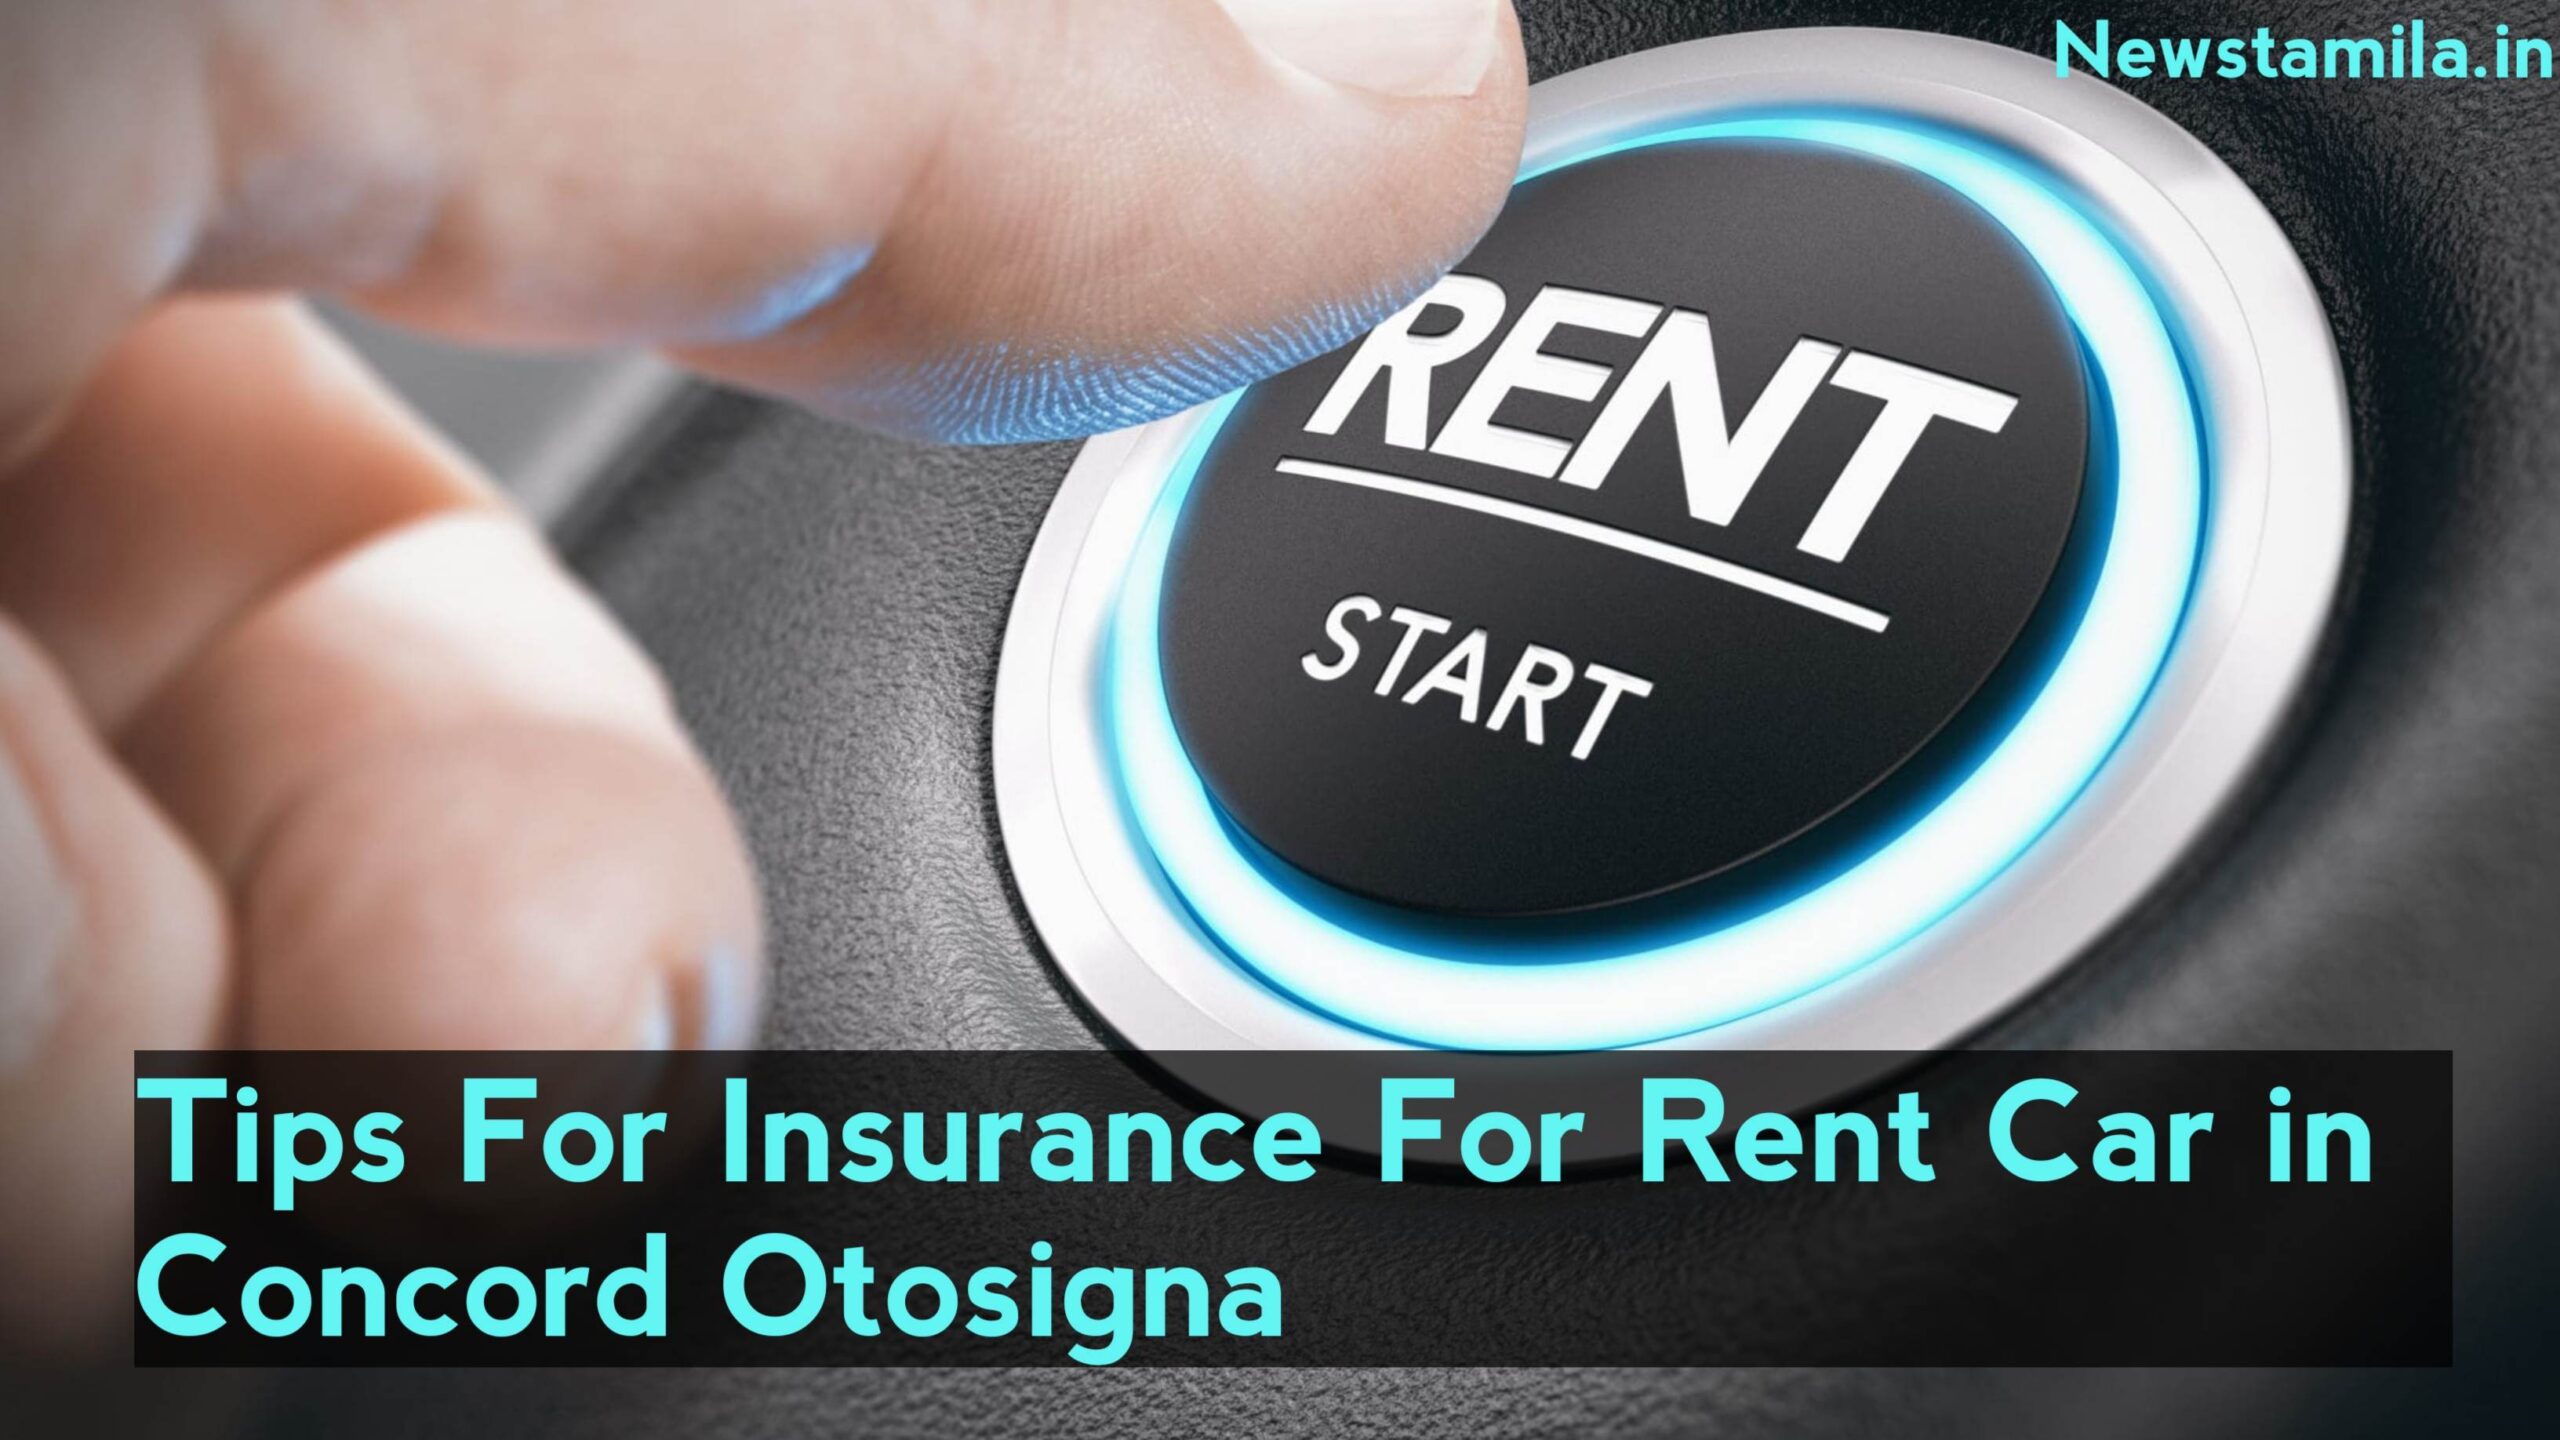 Tips For Renting Car : Insurance for rent car in concord otosigna 2023 : A Comprehensive Guide